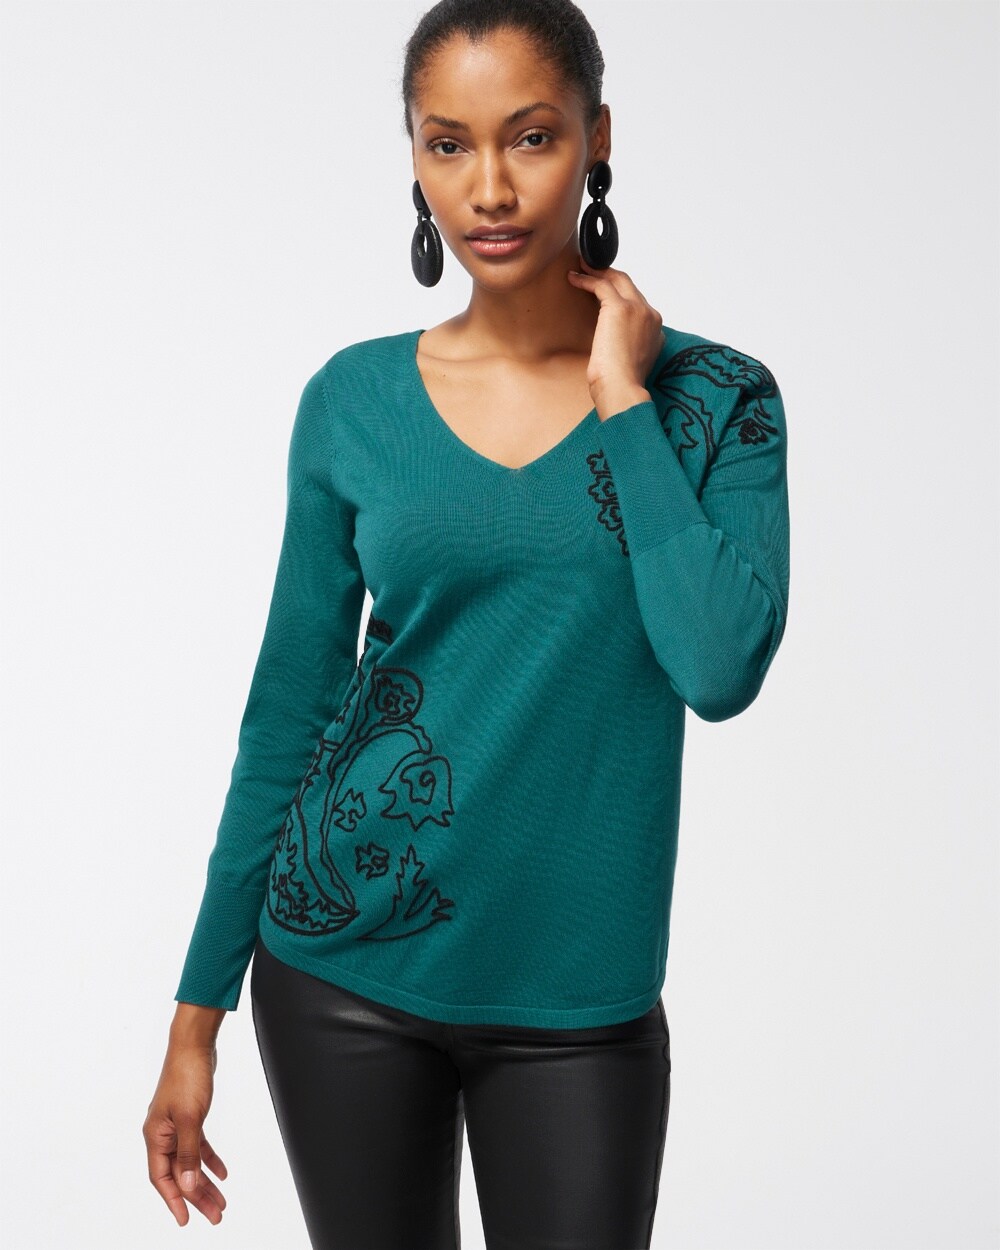 Spun Rayon Embroidered V-Neck Sweater